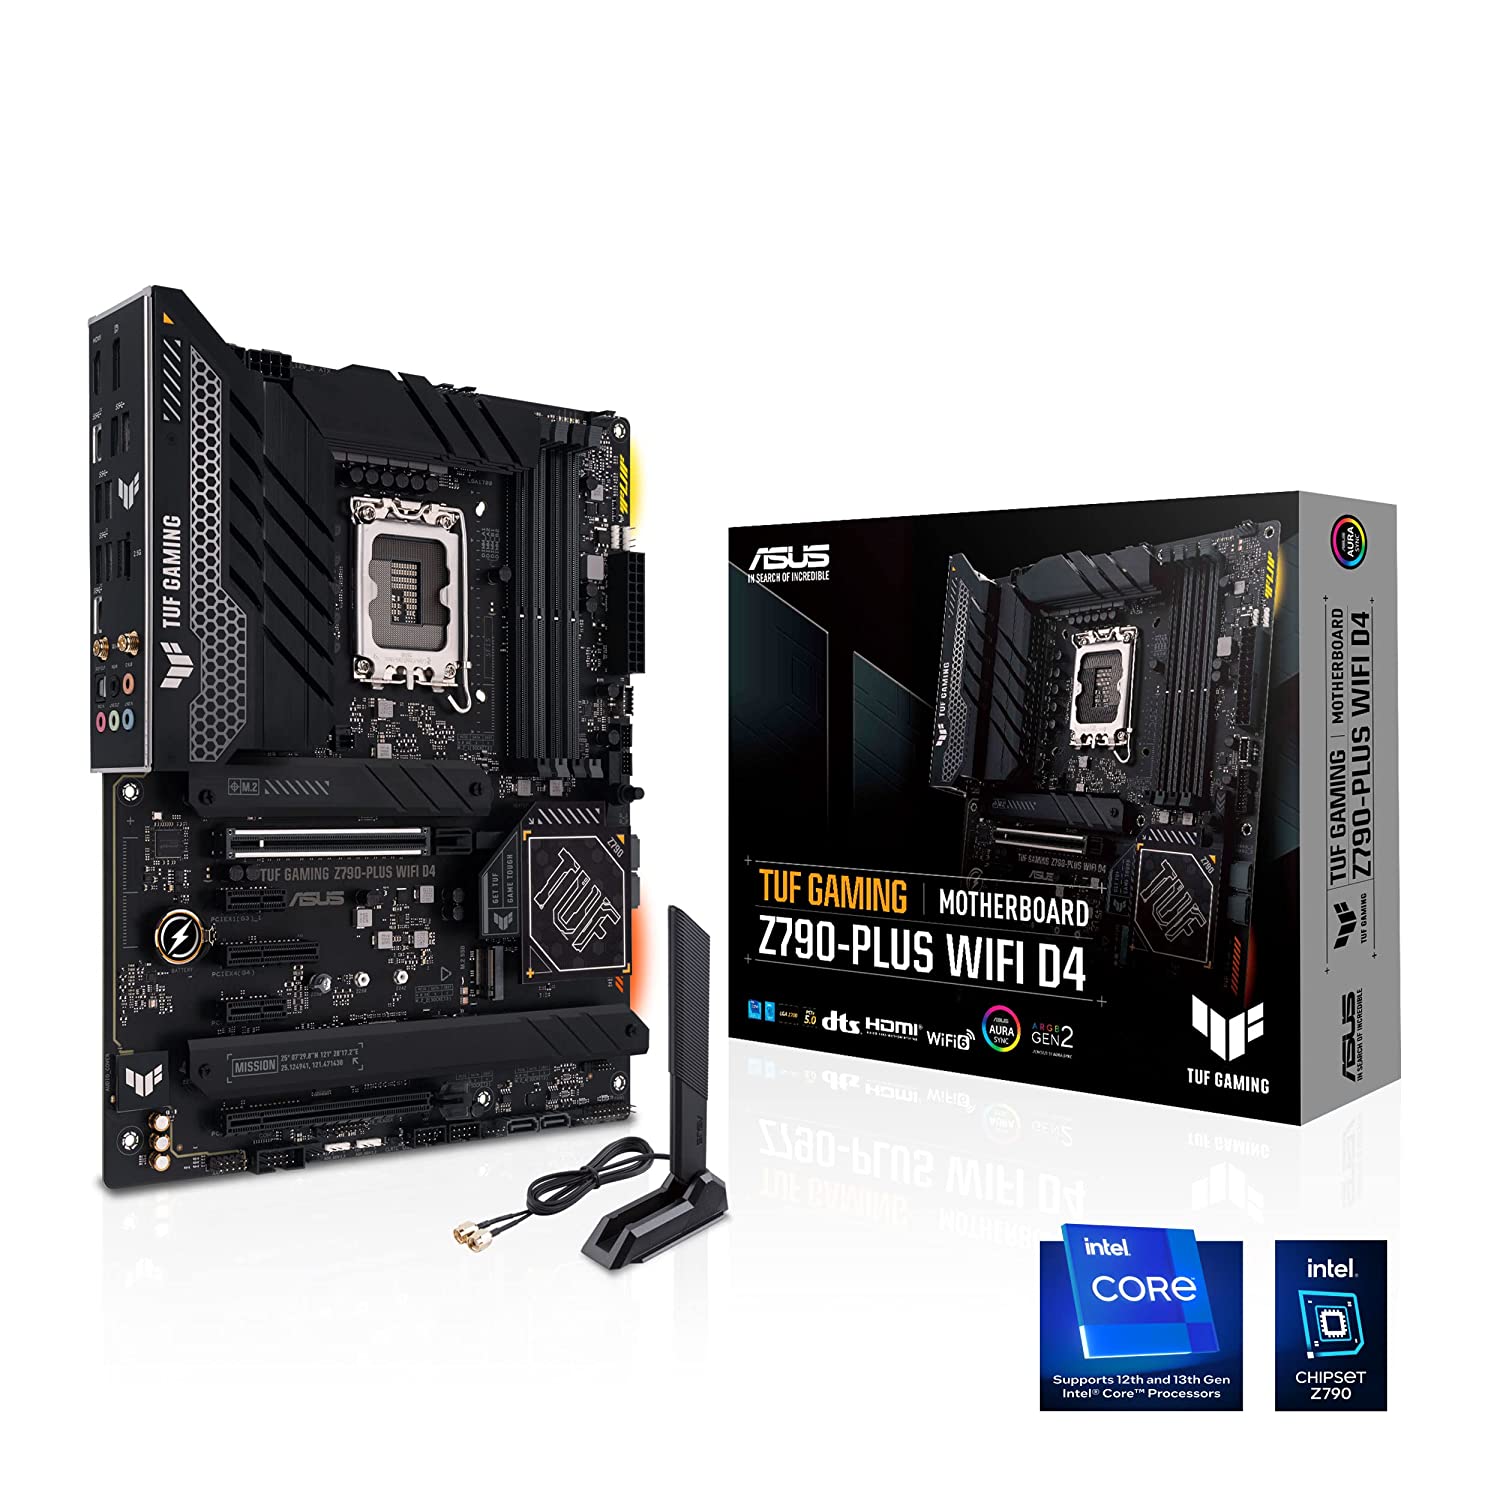 Asus TUF Gaming Z790 Plus WIFI D4 Motherboard with 16+1 Drmos Power Stages, Pcie 5.0, Ddr4 Ram Support, Four M.2 Slots, USB 3.2 Gen 2X2 Type-C, & Aura Sync RGB Lighting-Motherboard-dealsplant